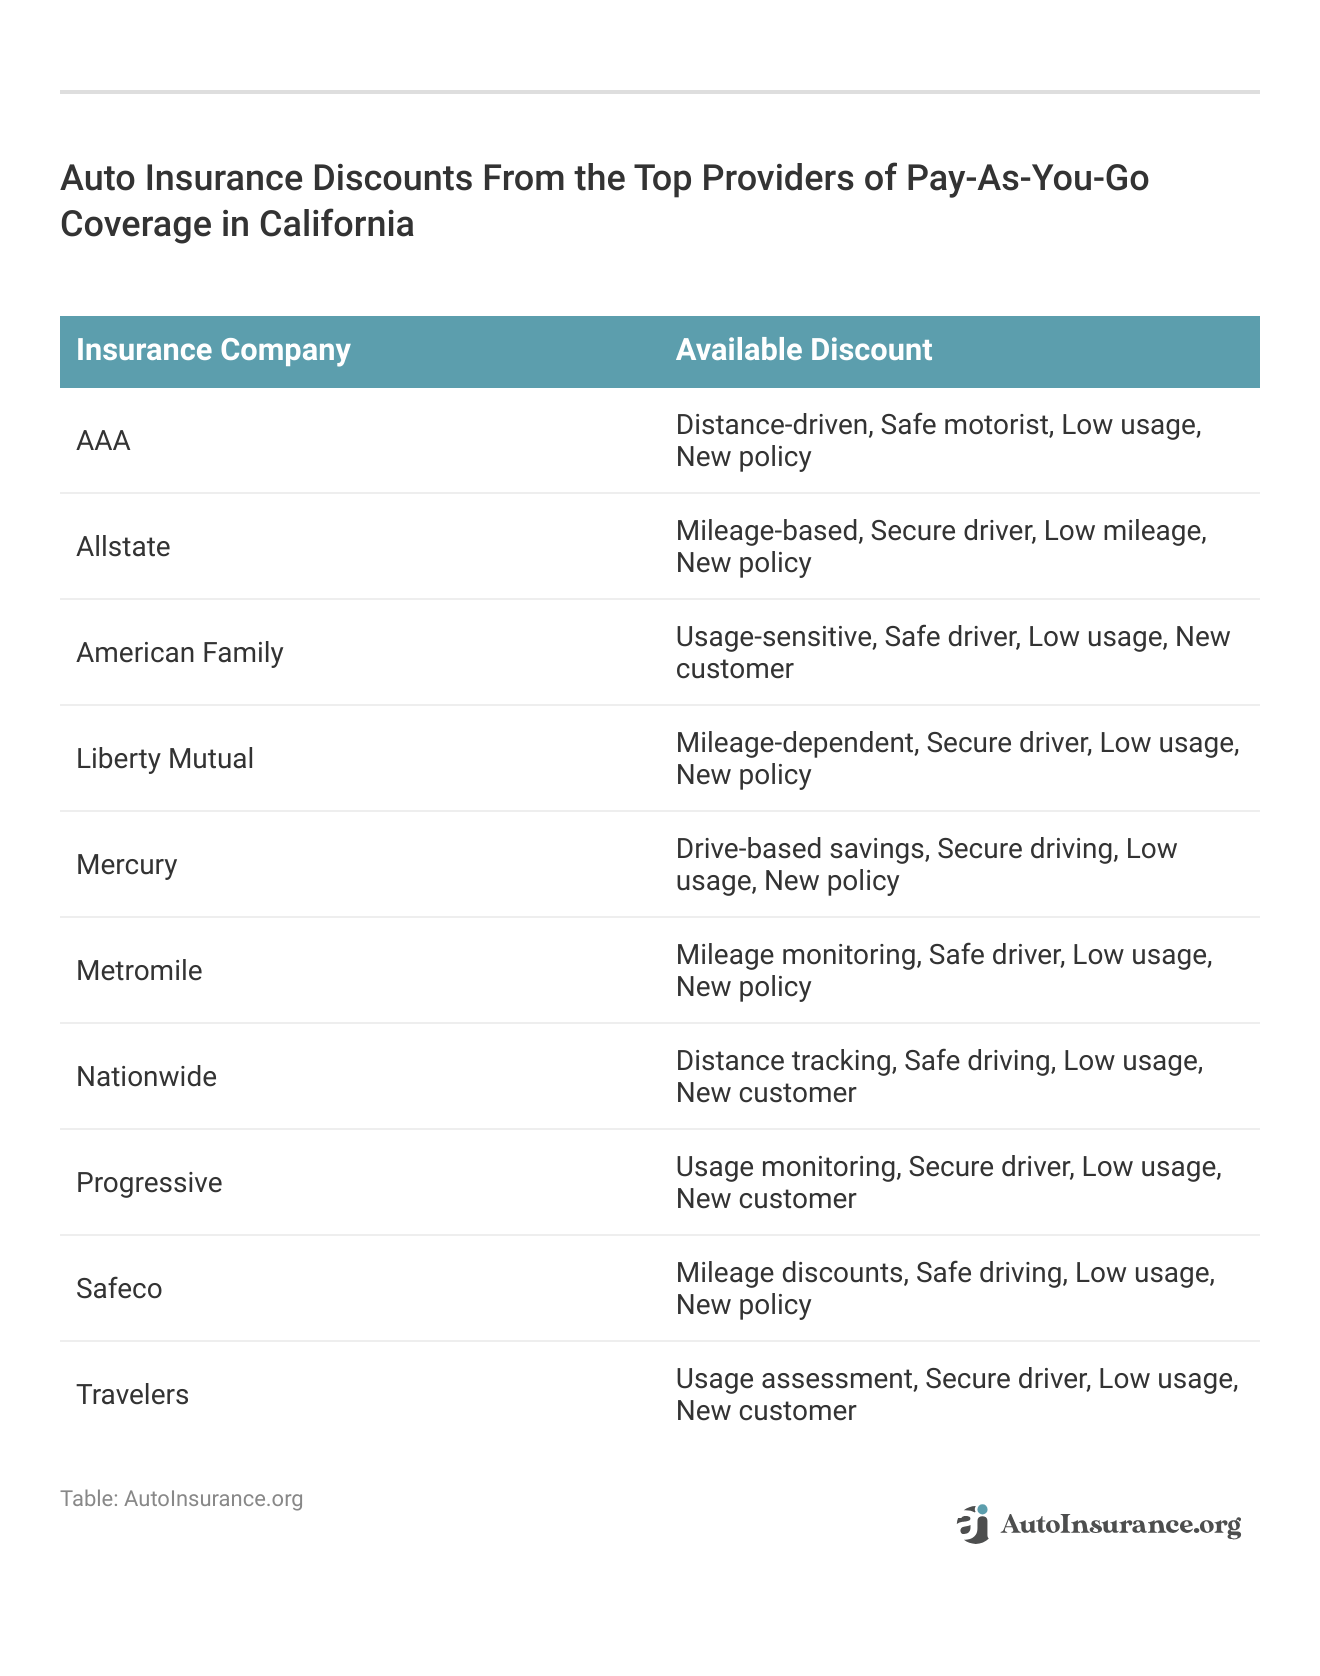 <h3>Auto Insurance Discounts From the Top Providers of Pay-As-You-Go Coverage in California</h3>